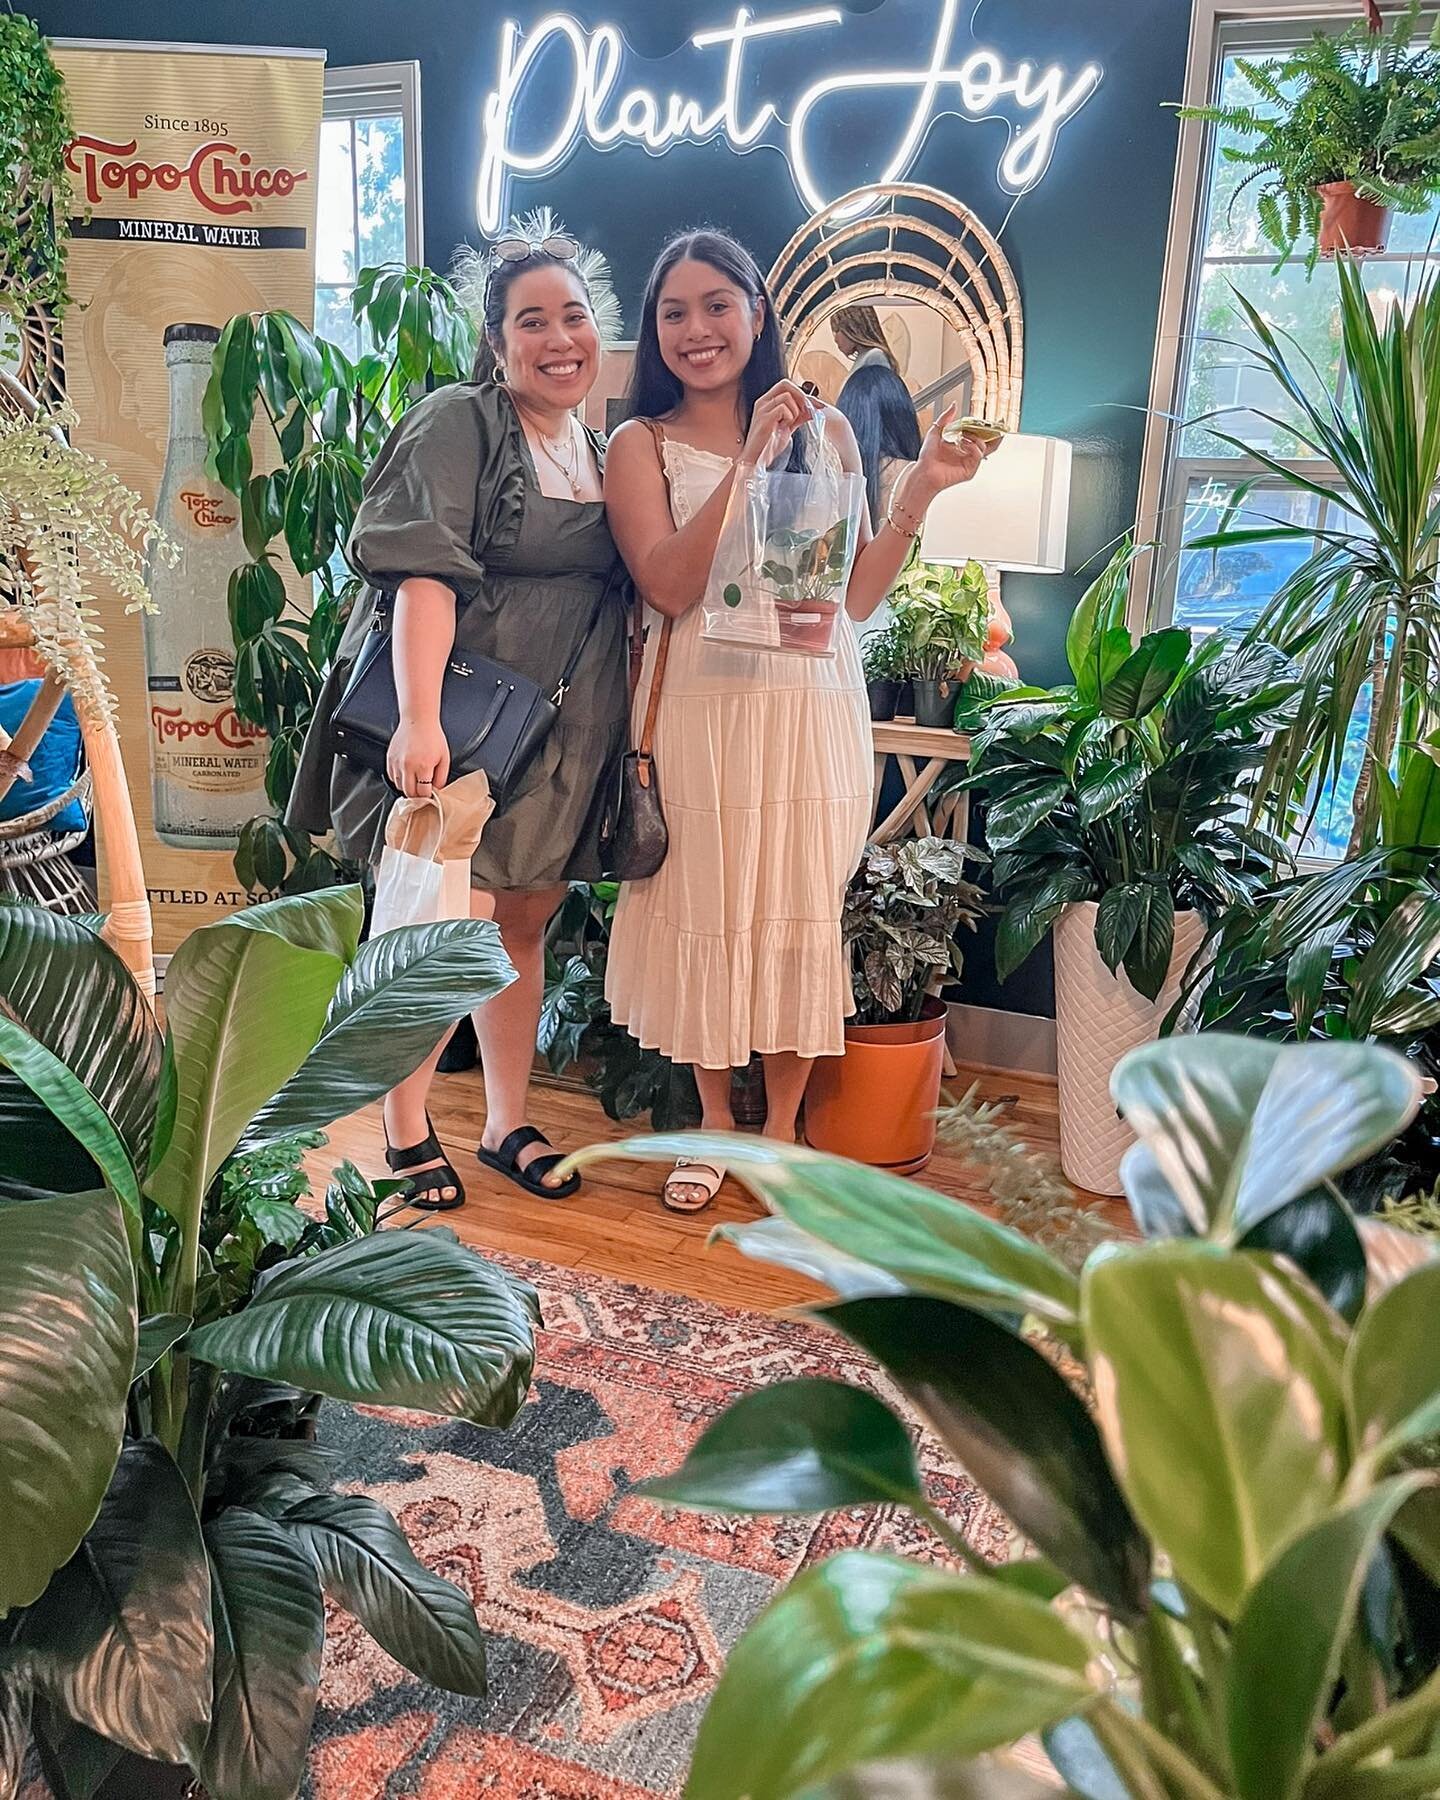 Plant Shopping is just a little better when you do it with friends. 

Guess what is coming back!!Two Words

FRIENDSHIP 
FRIDAYS

Shop with your friends this Friday &amp; receive 15% off all plants &amp; product. 

We can&rsquo;t wait to celebrate all